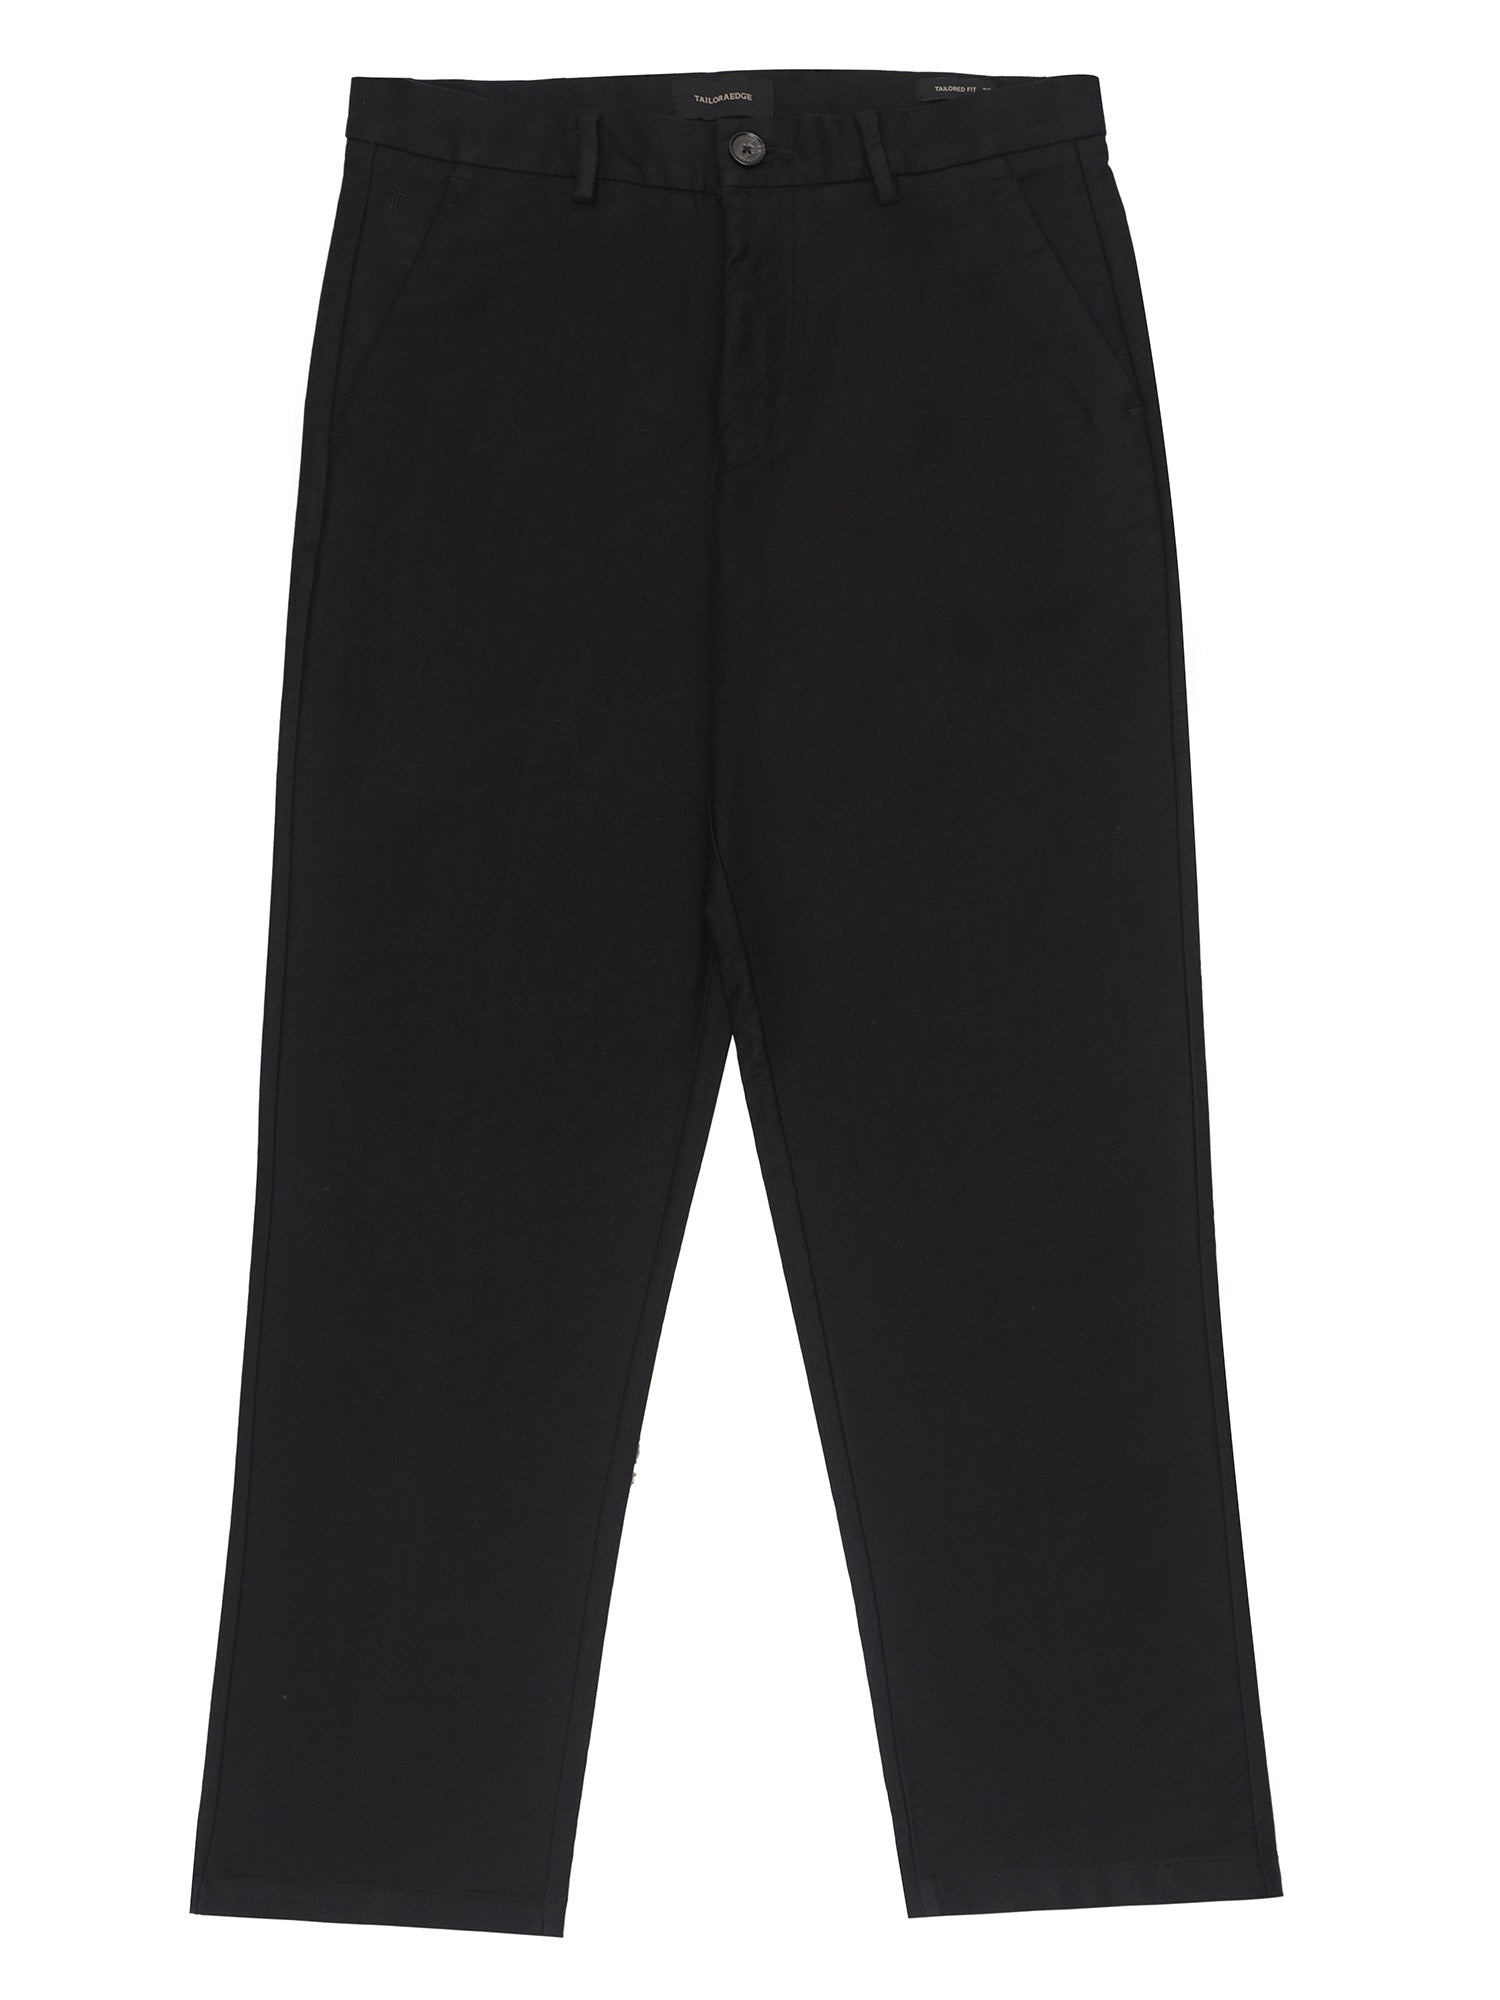 Soft Modal Dark Olive Relaxed Pant